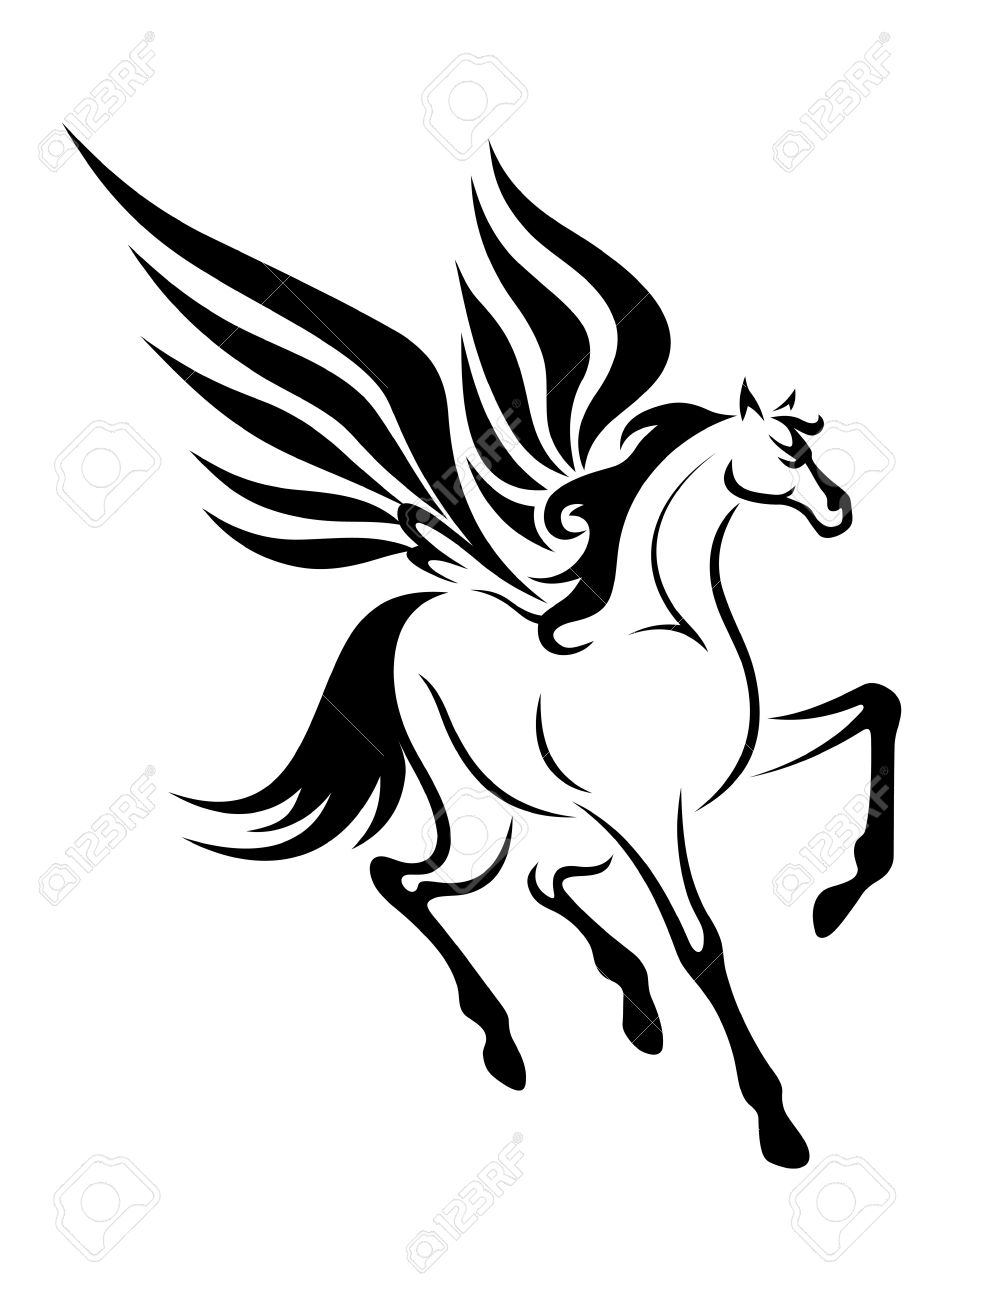 Black Pegasus horse with wings for tattoo. Vector illustration